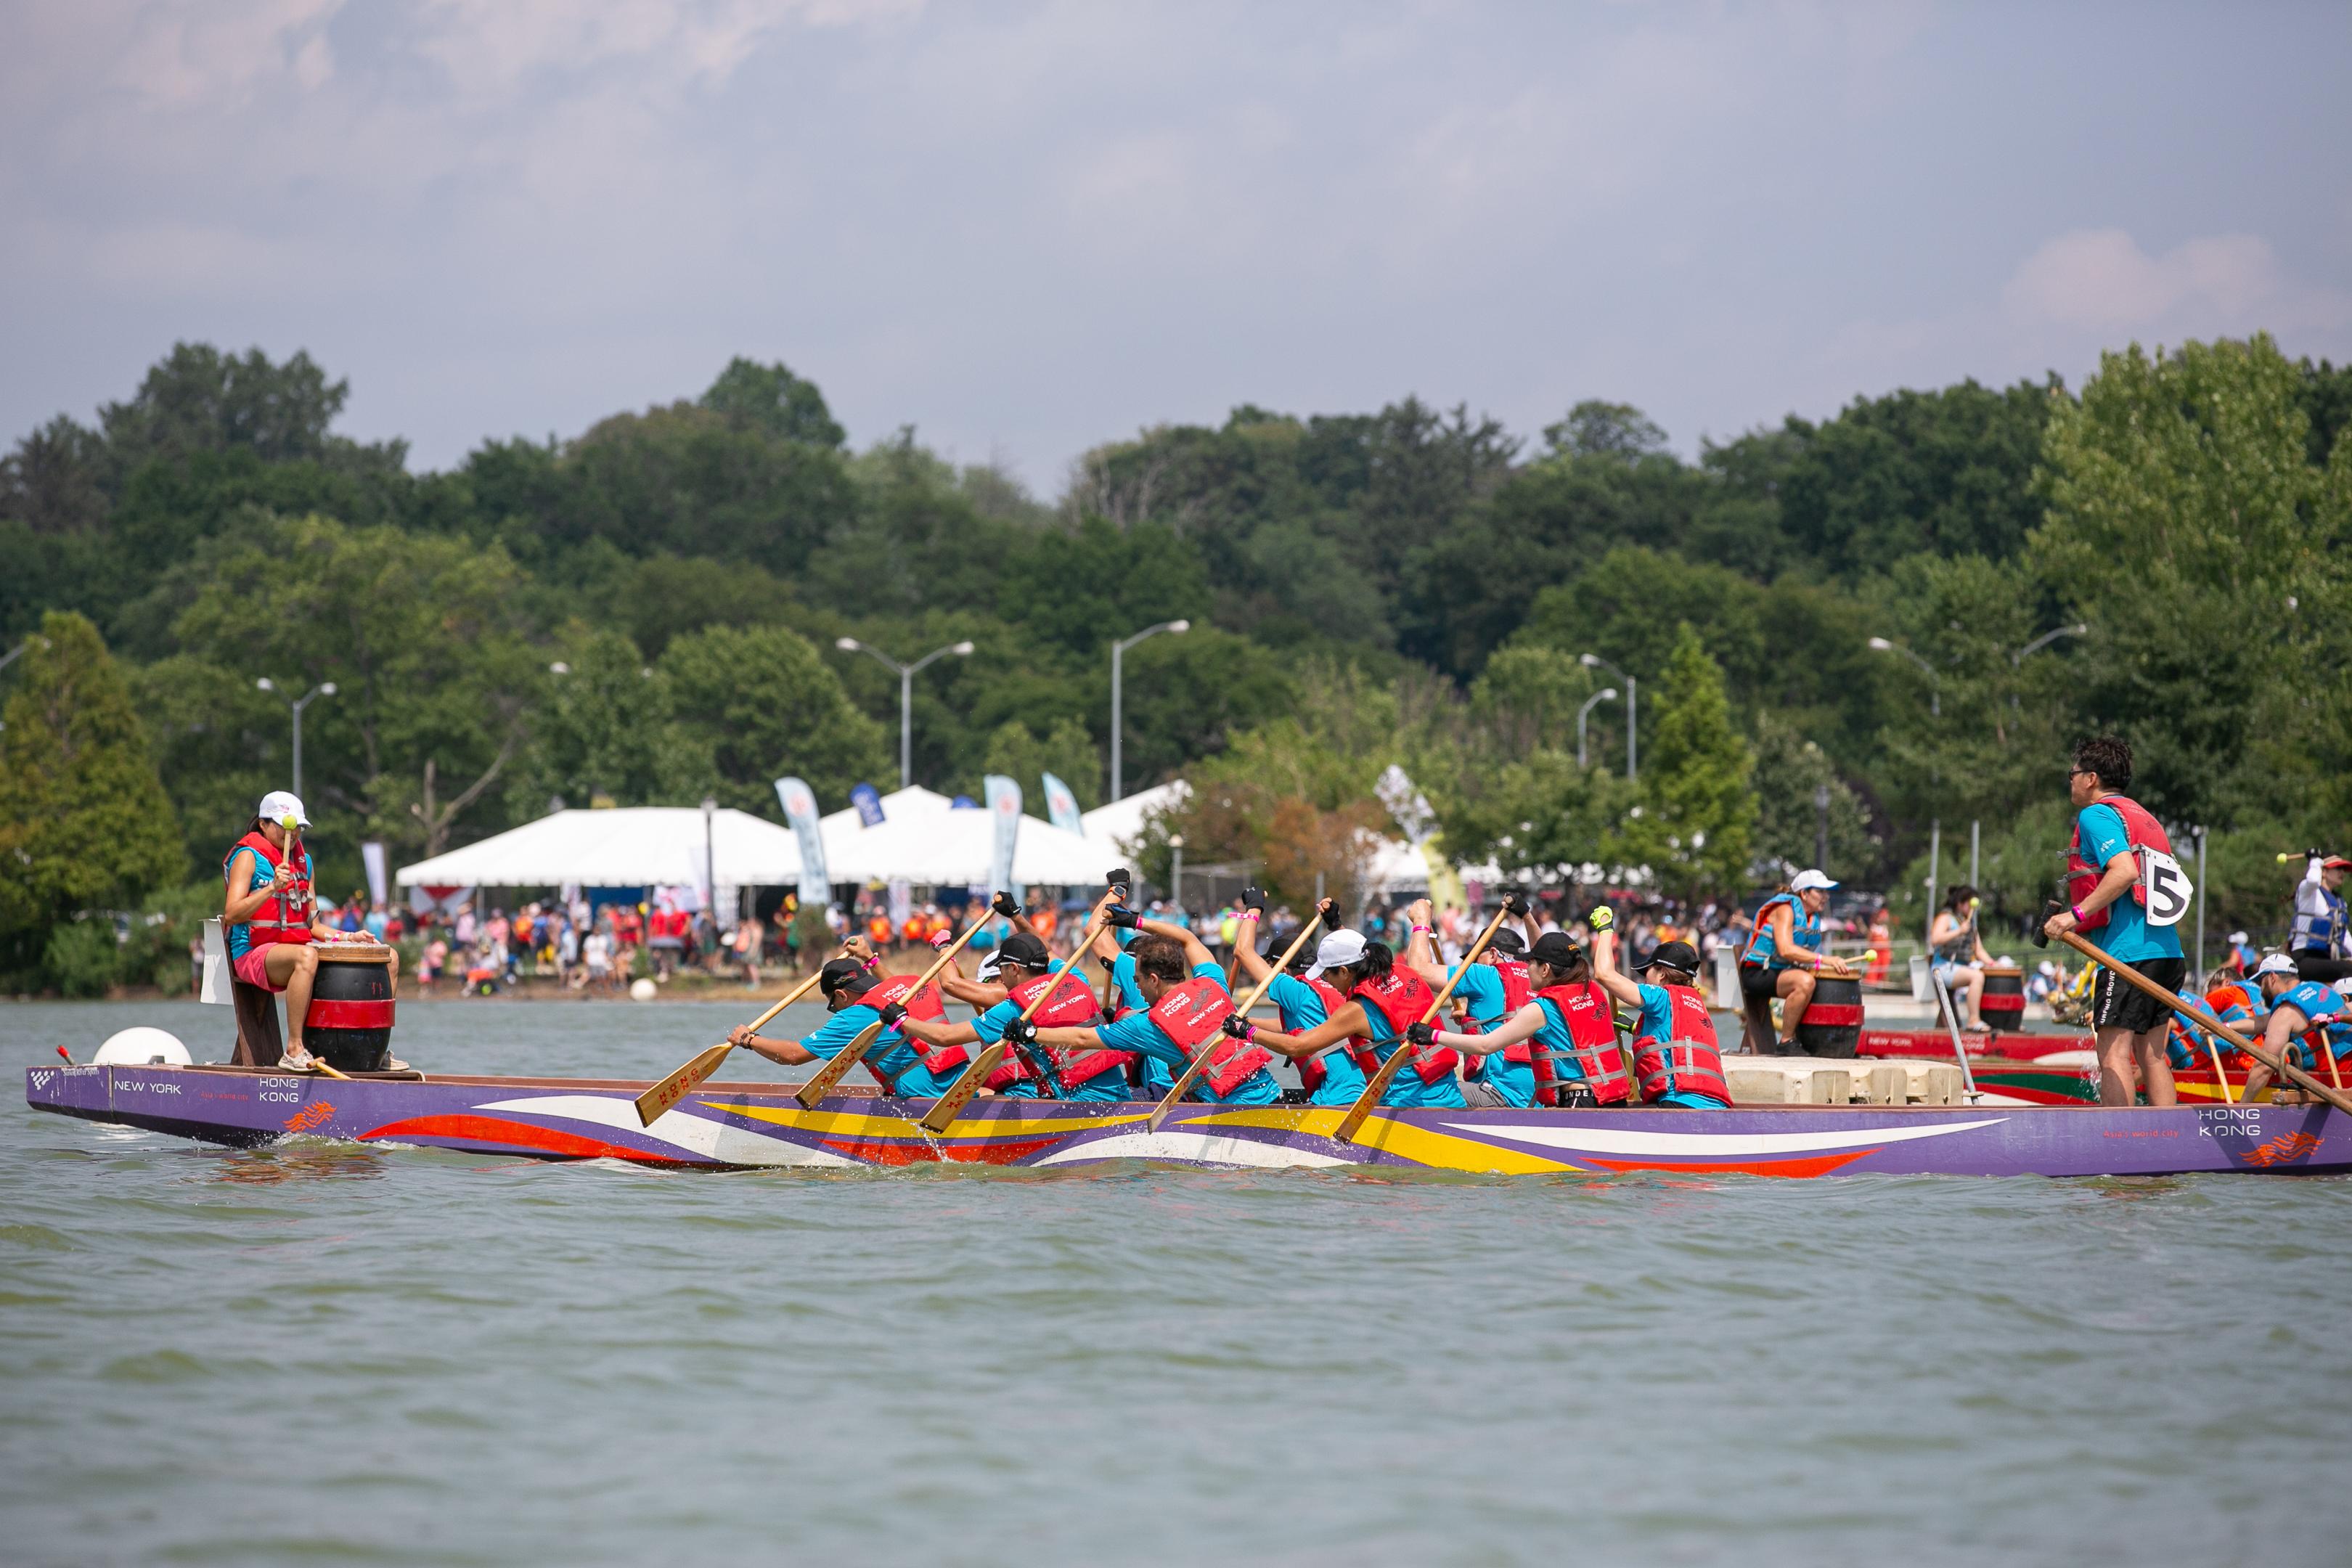 The 31st edition of the Hong Kong Dragon Boat Festival in New York was held at the Flushing Meadows Corona Park on August 12 and 13 (New York time), with some 180 teams and over 1 500 competitors racing this year.